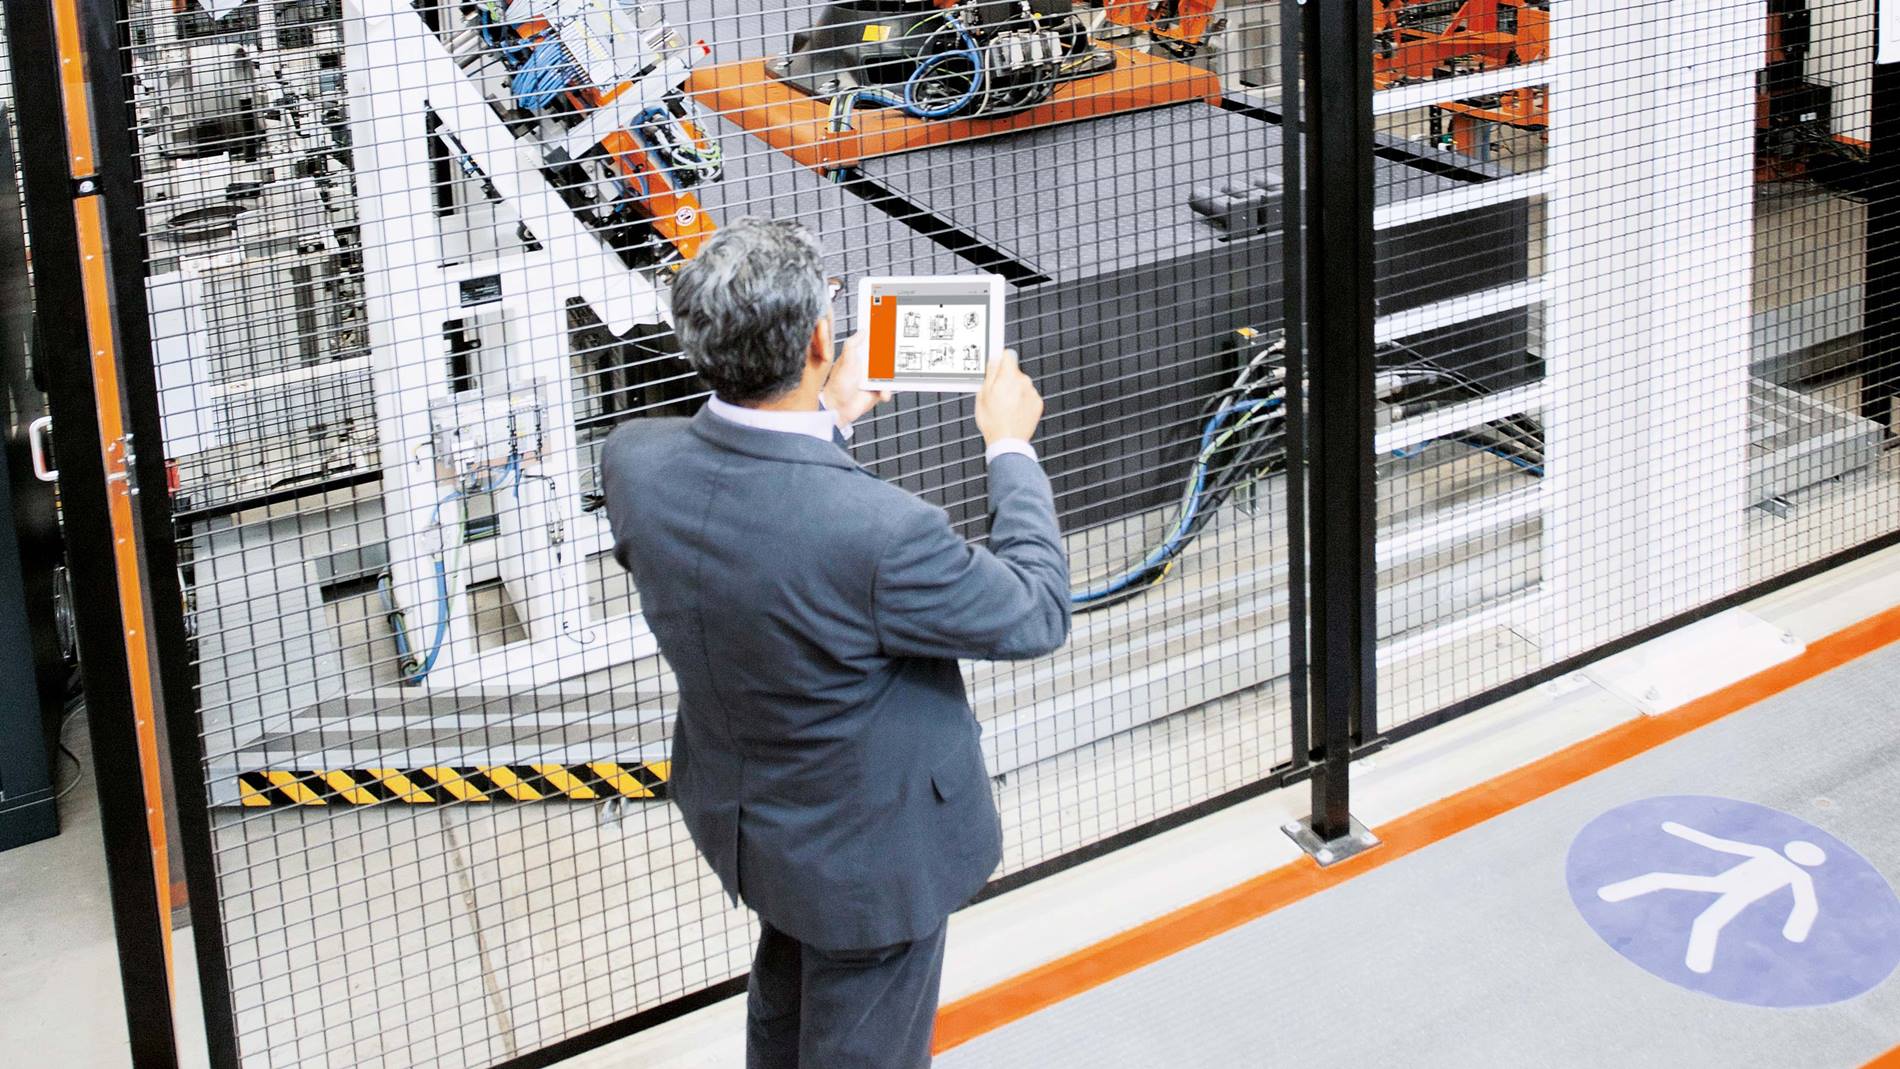 Industrial Automation: All processes can be controlled via the IPad